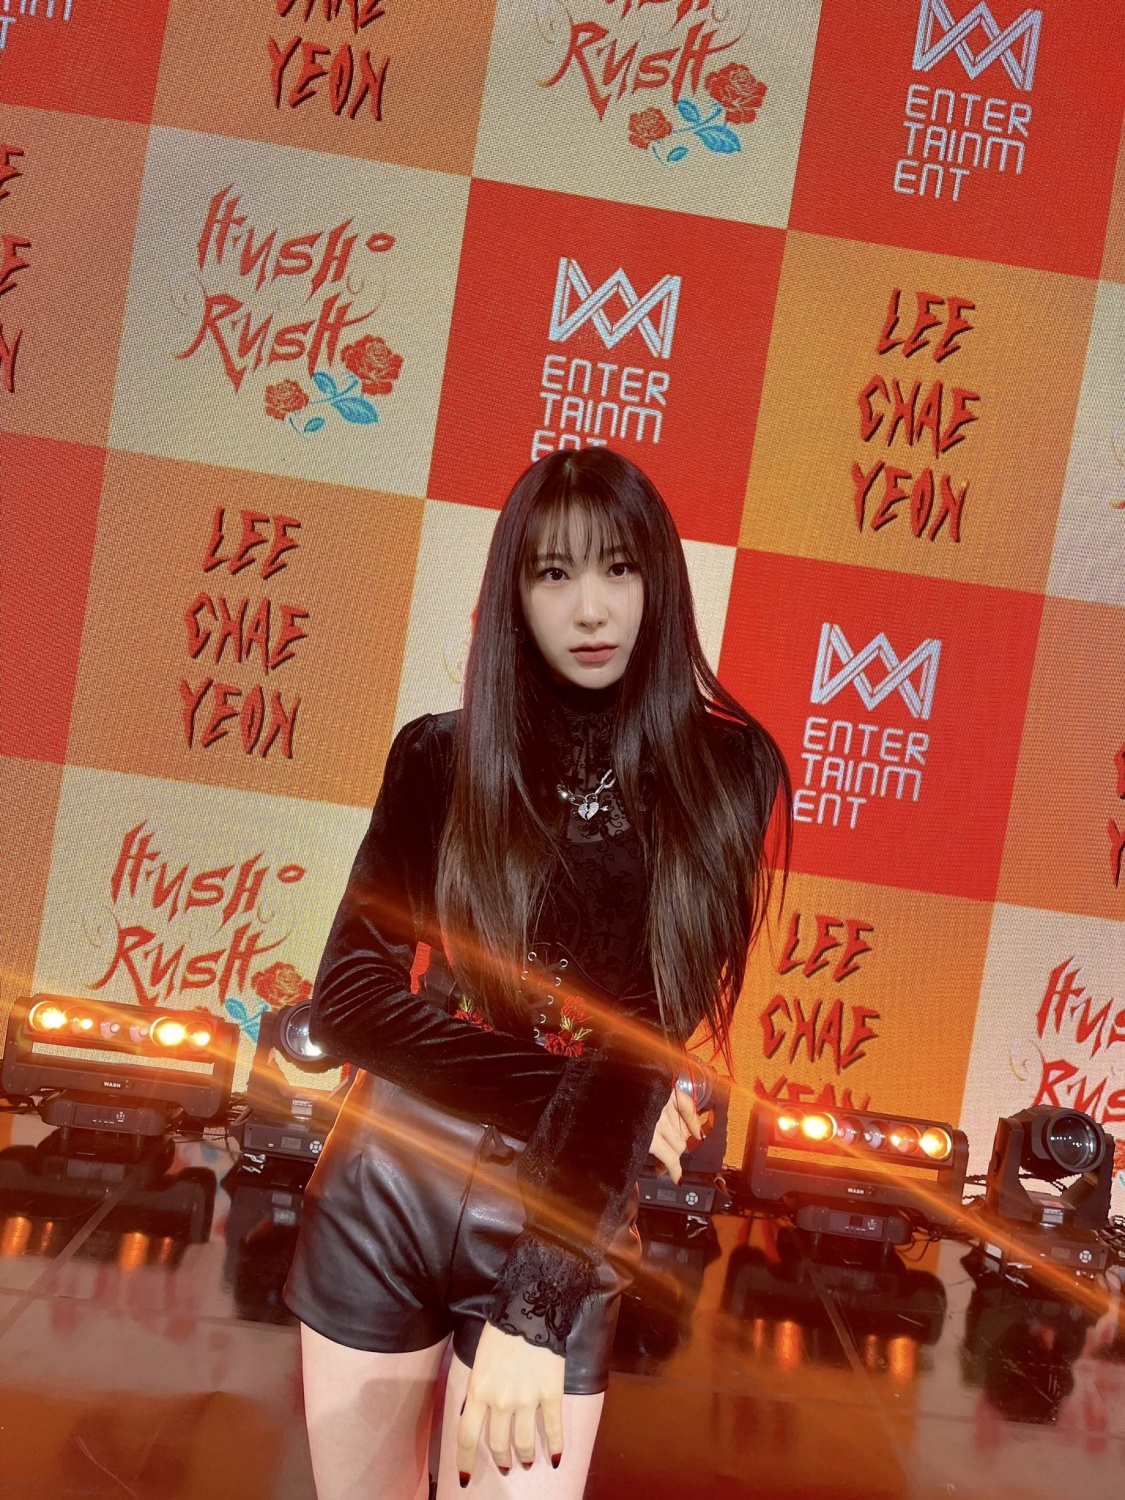 "324 year old vampire" LEE CHAE YEON, IZ*ONE take off and stand alone